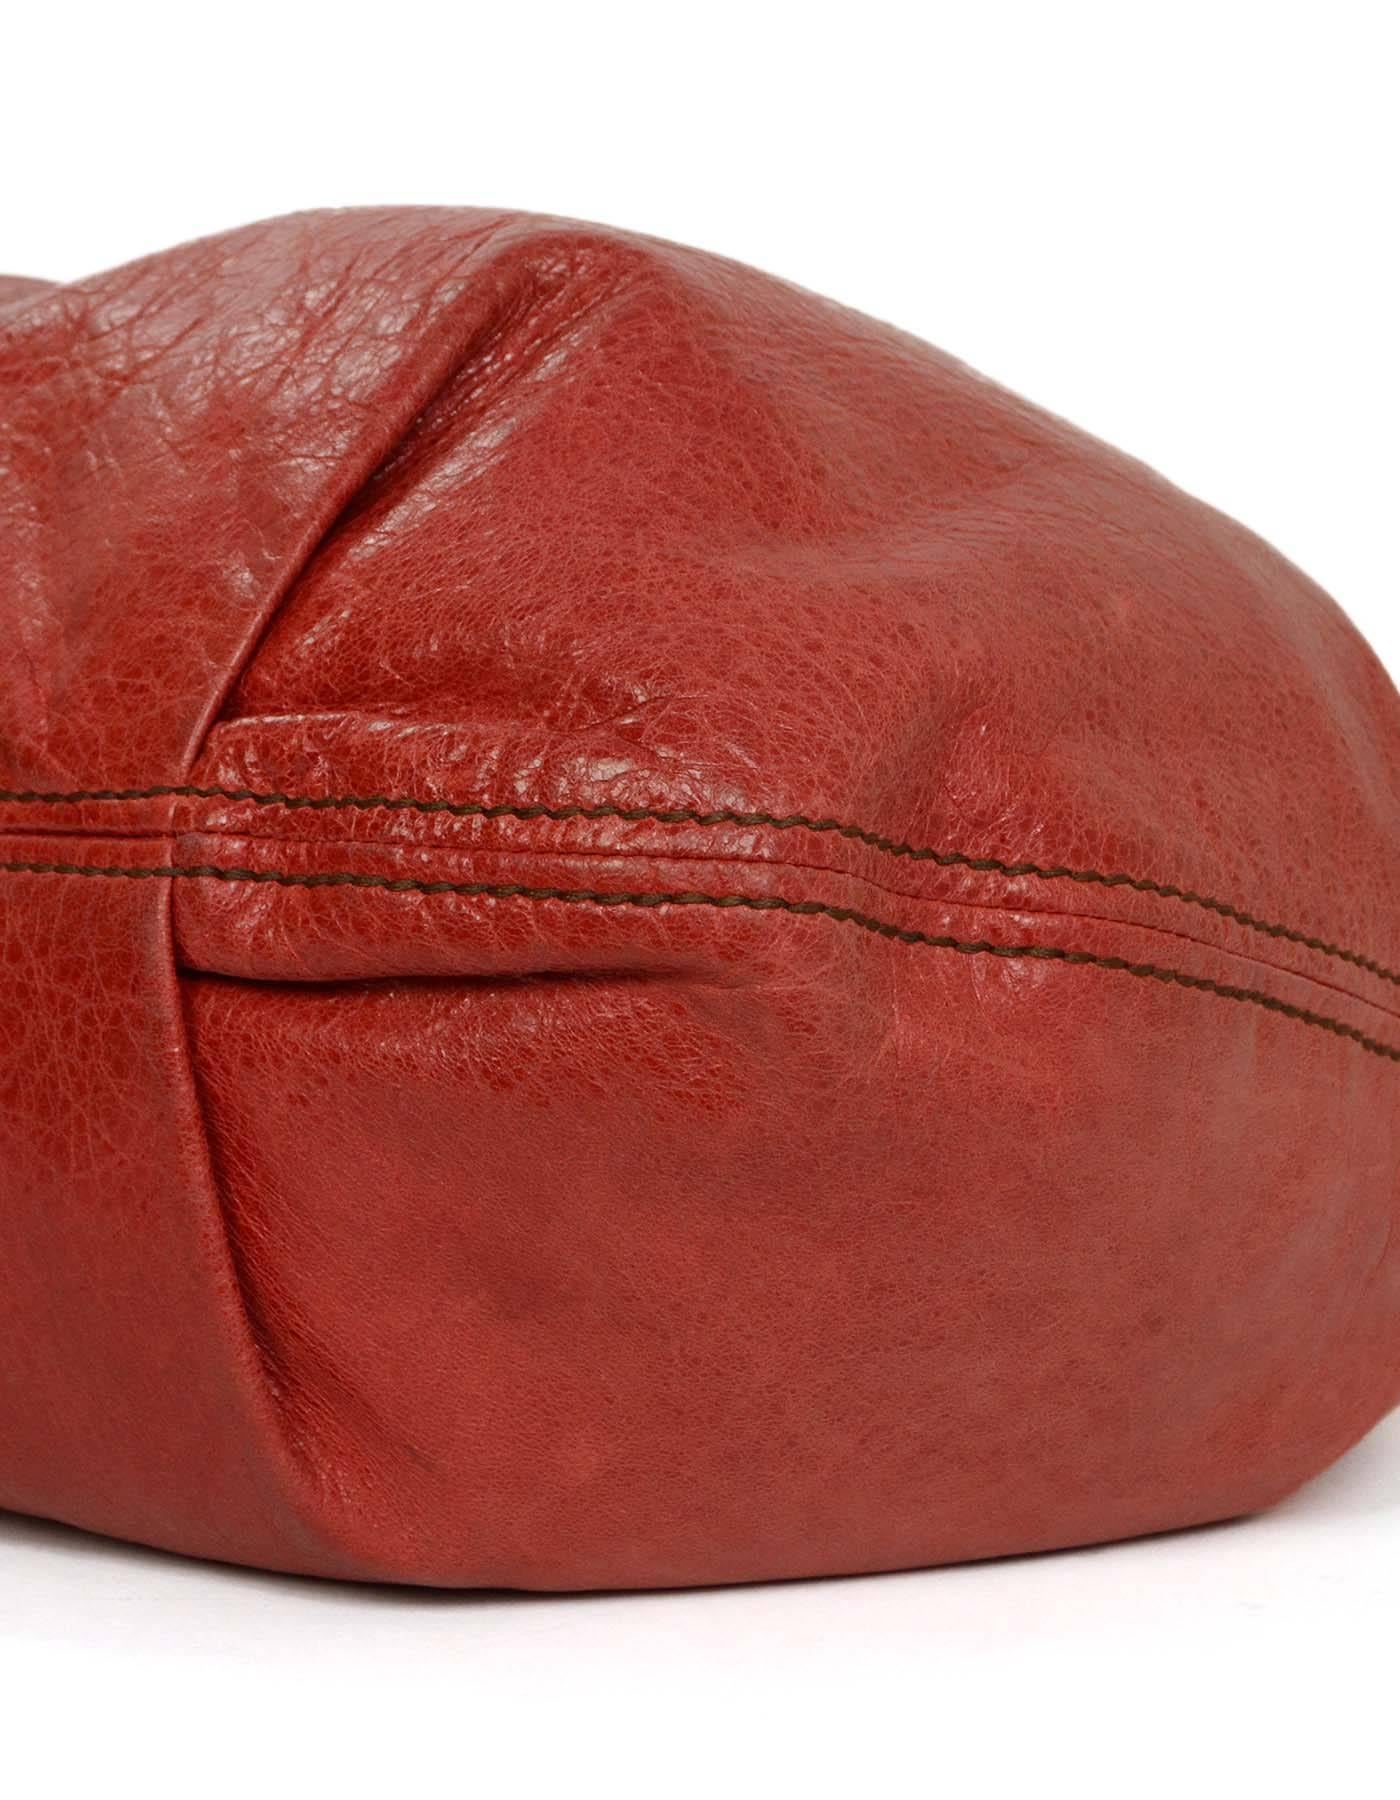 Miu Miu Red Distressed Leather Hobo Bag GHW In Excellent Condition In New York, NY